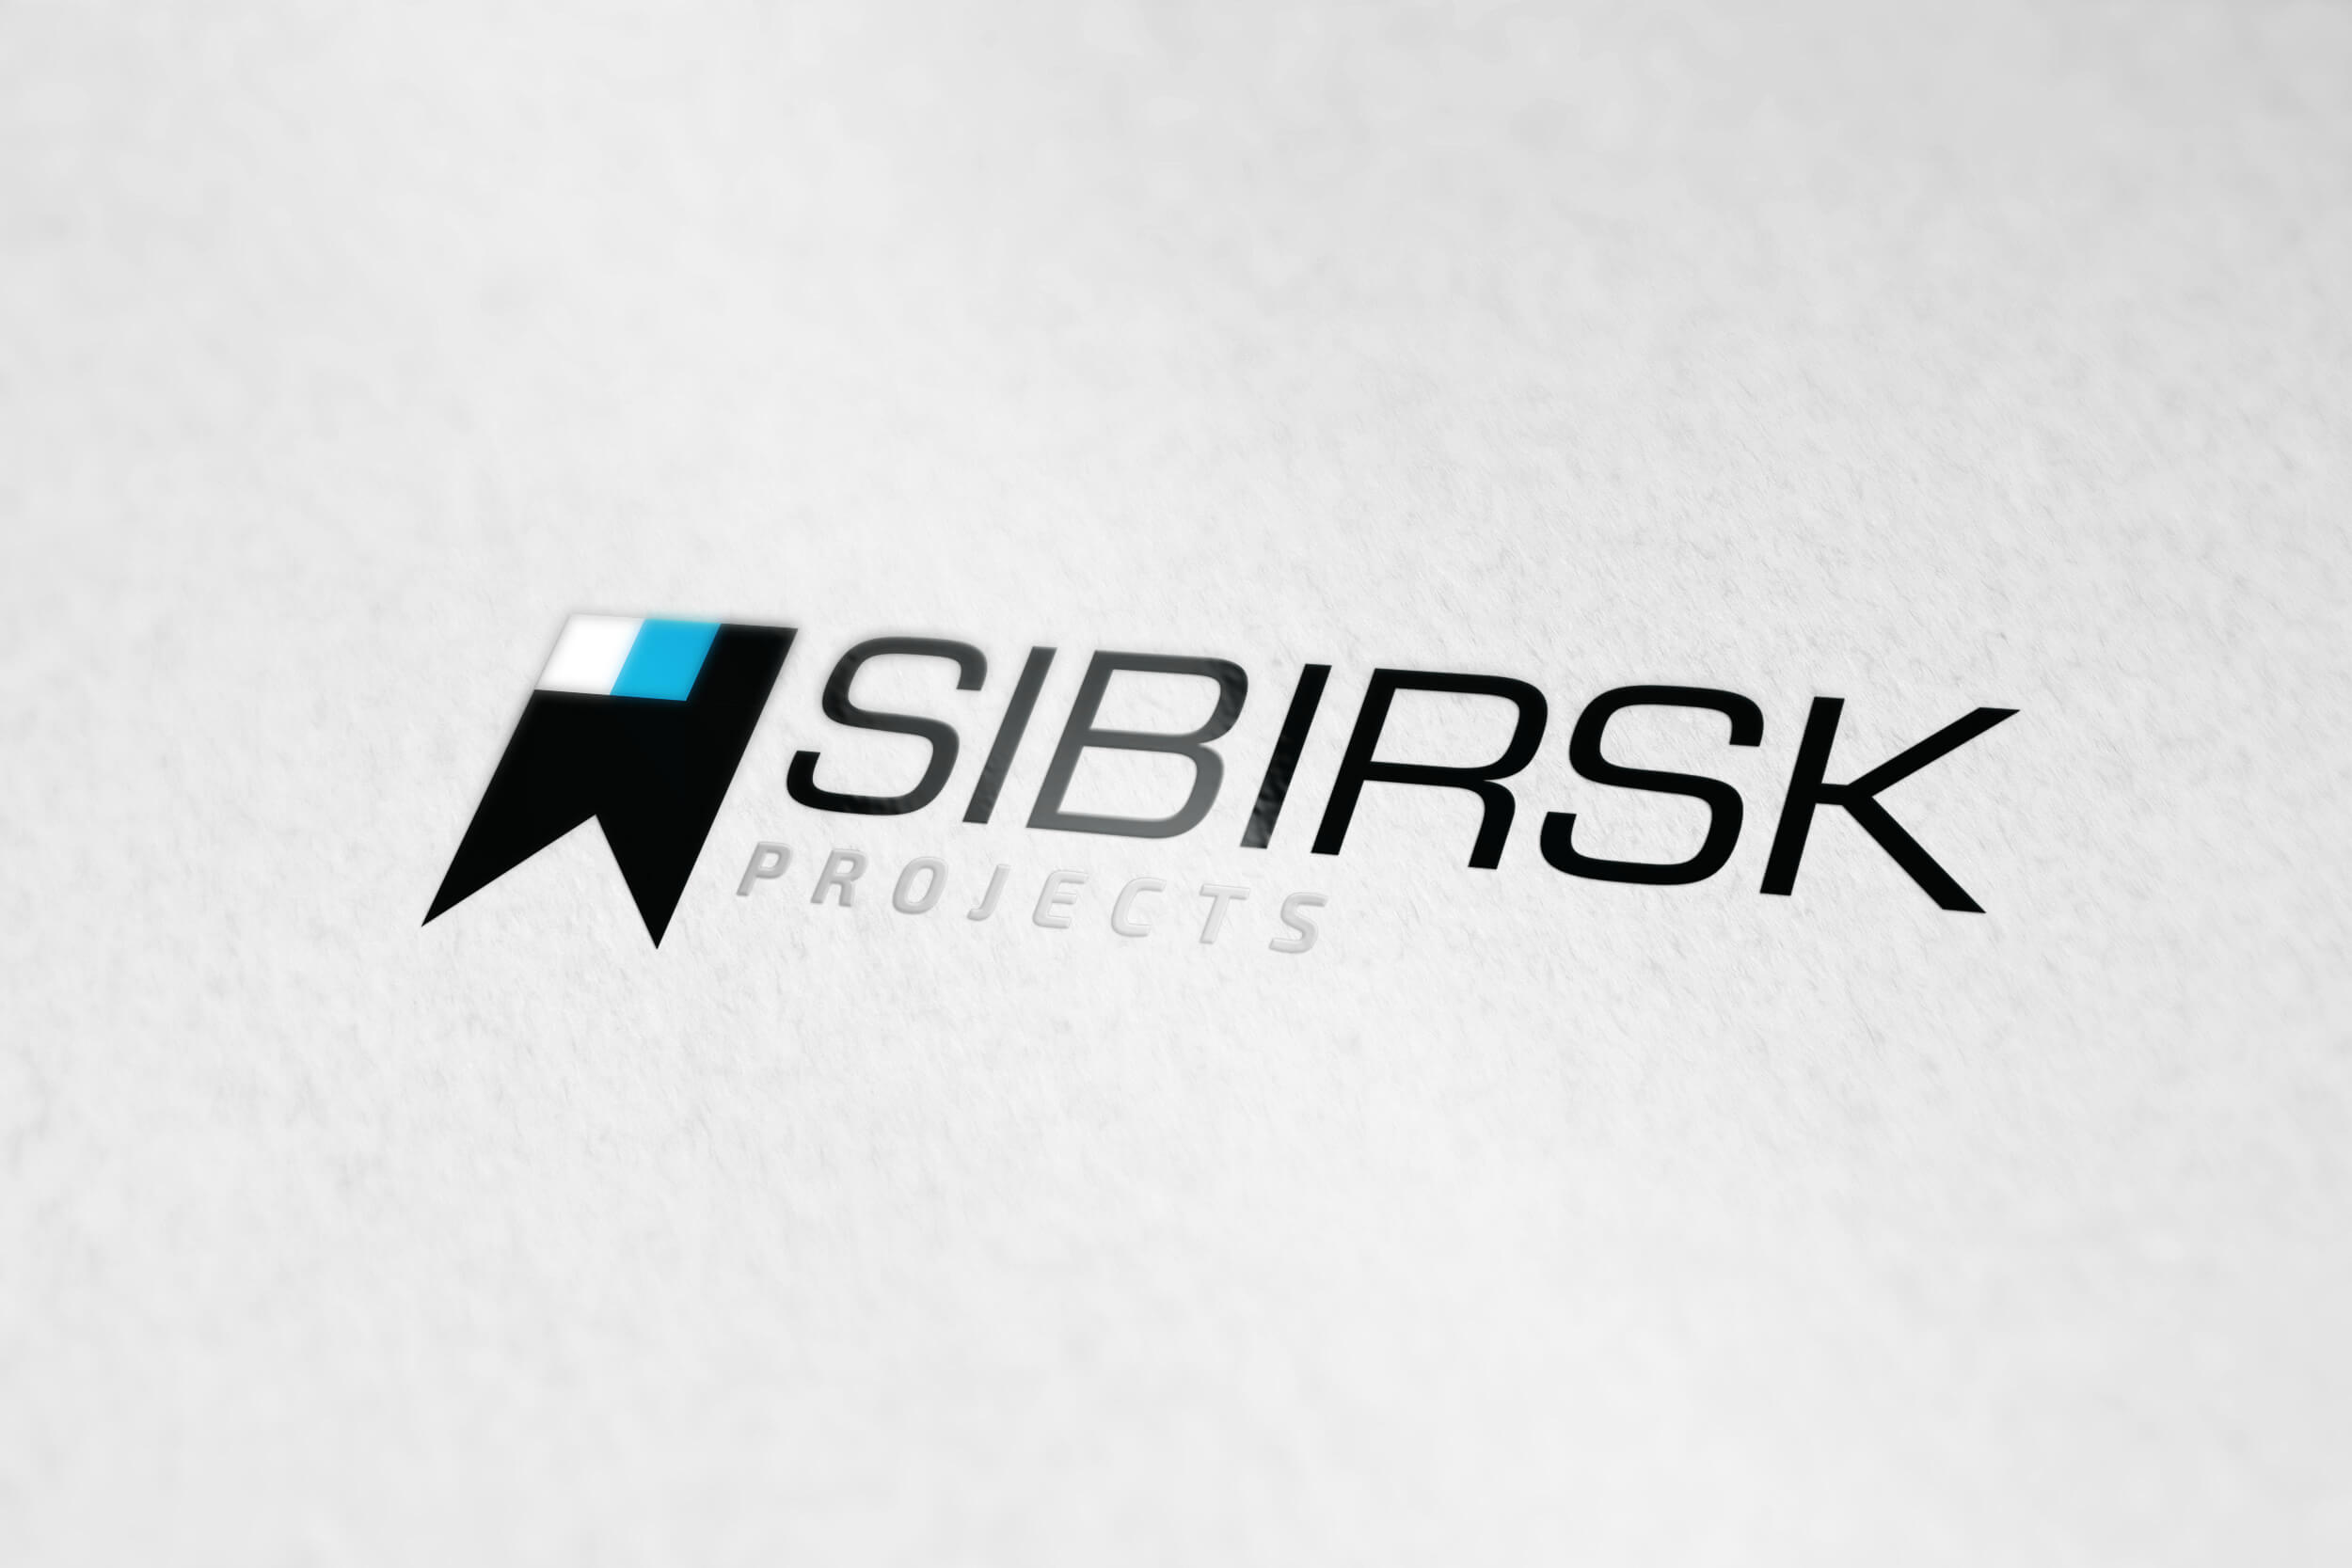 SIBIRSK Projects - Designs by CR8VE designs Perth